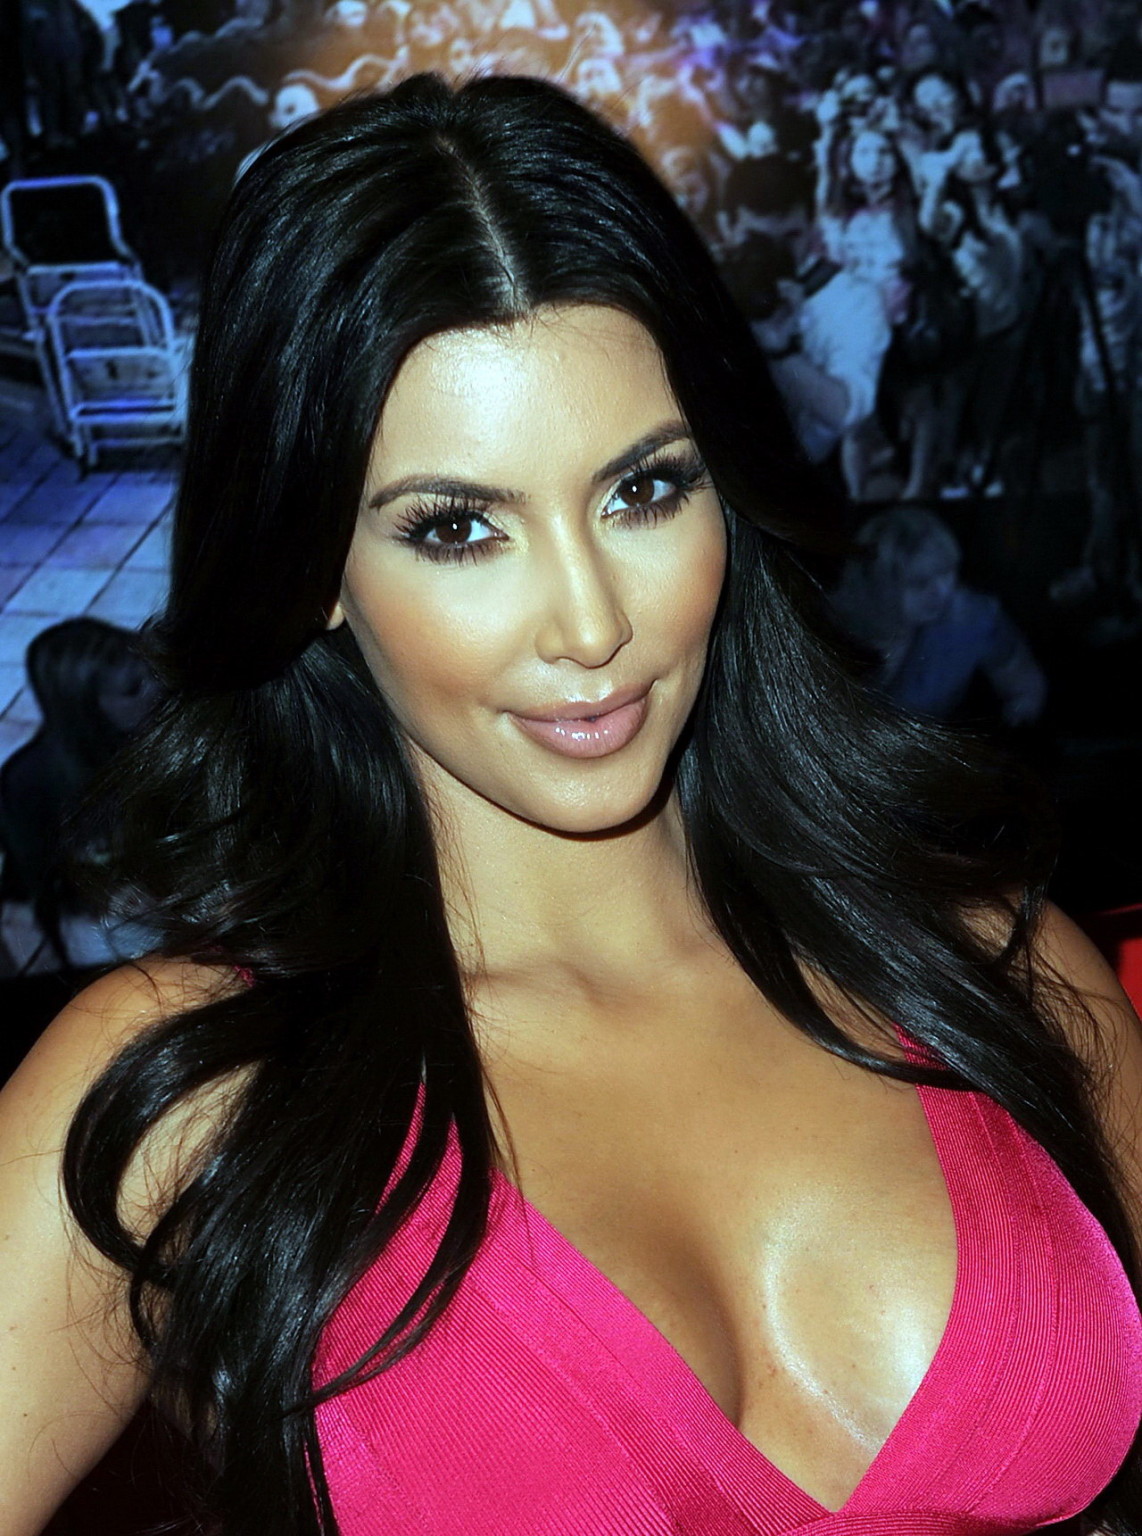 Kim Kardashian busty in tight pink dress posing alongside with her wax dummy at Madame Tus